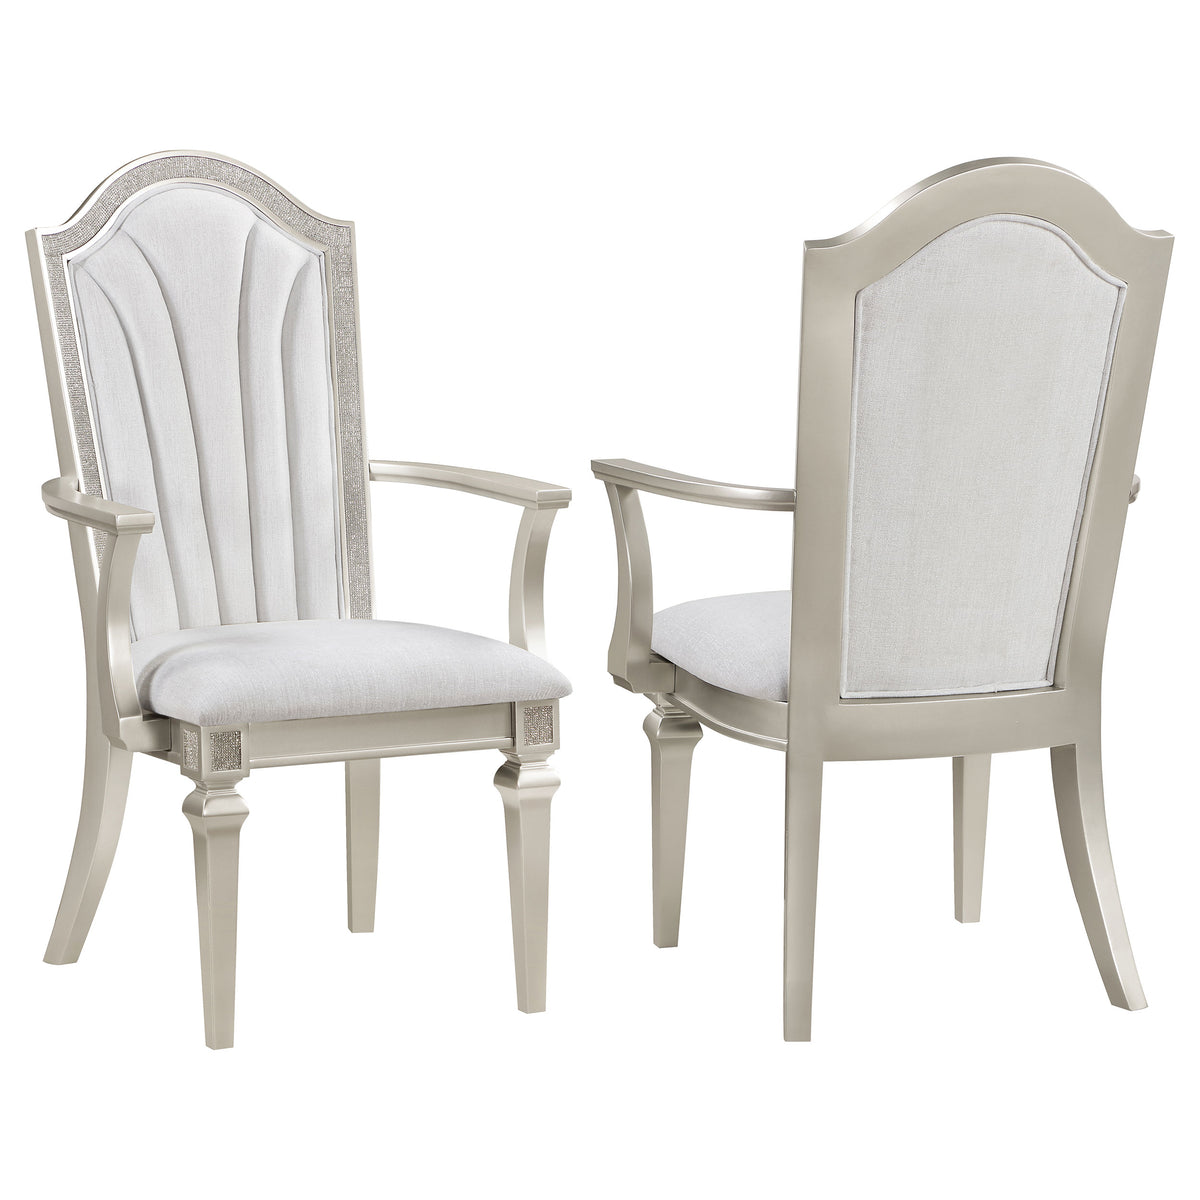 Evangeline Upholstered Dining Arm Chair with Faux Diamond Trim Ivory and Silver Oak (Set of 2) Evangeline Upholstered Dining Arm Chair with Faux Diamond Trim Ivory and Silver Oak (Set of 2) Half Price Furniture